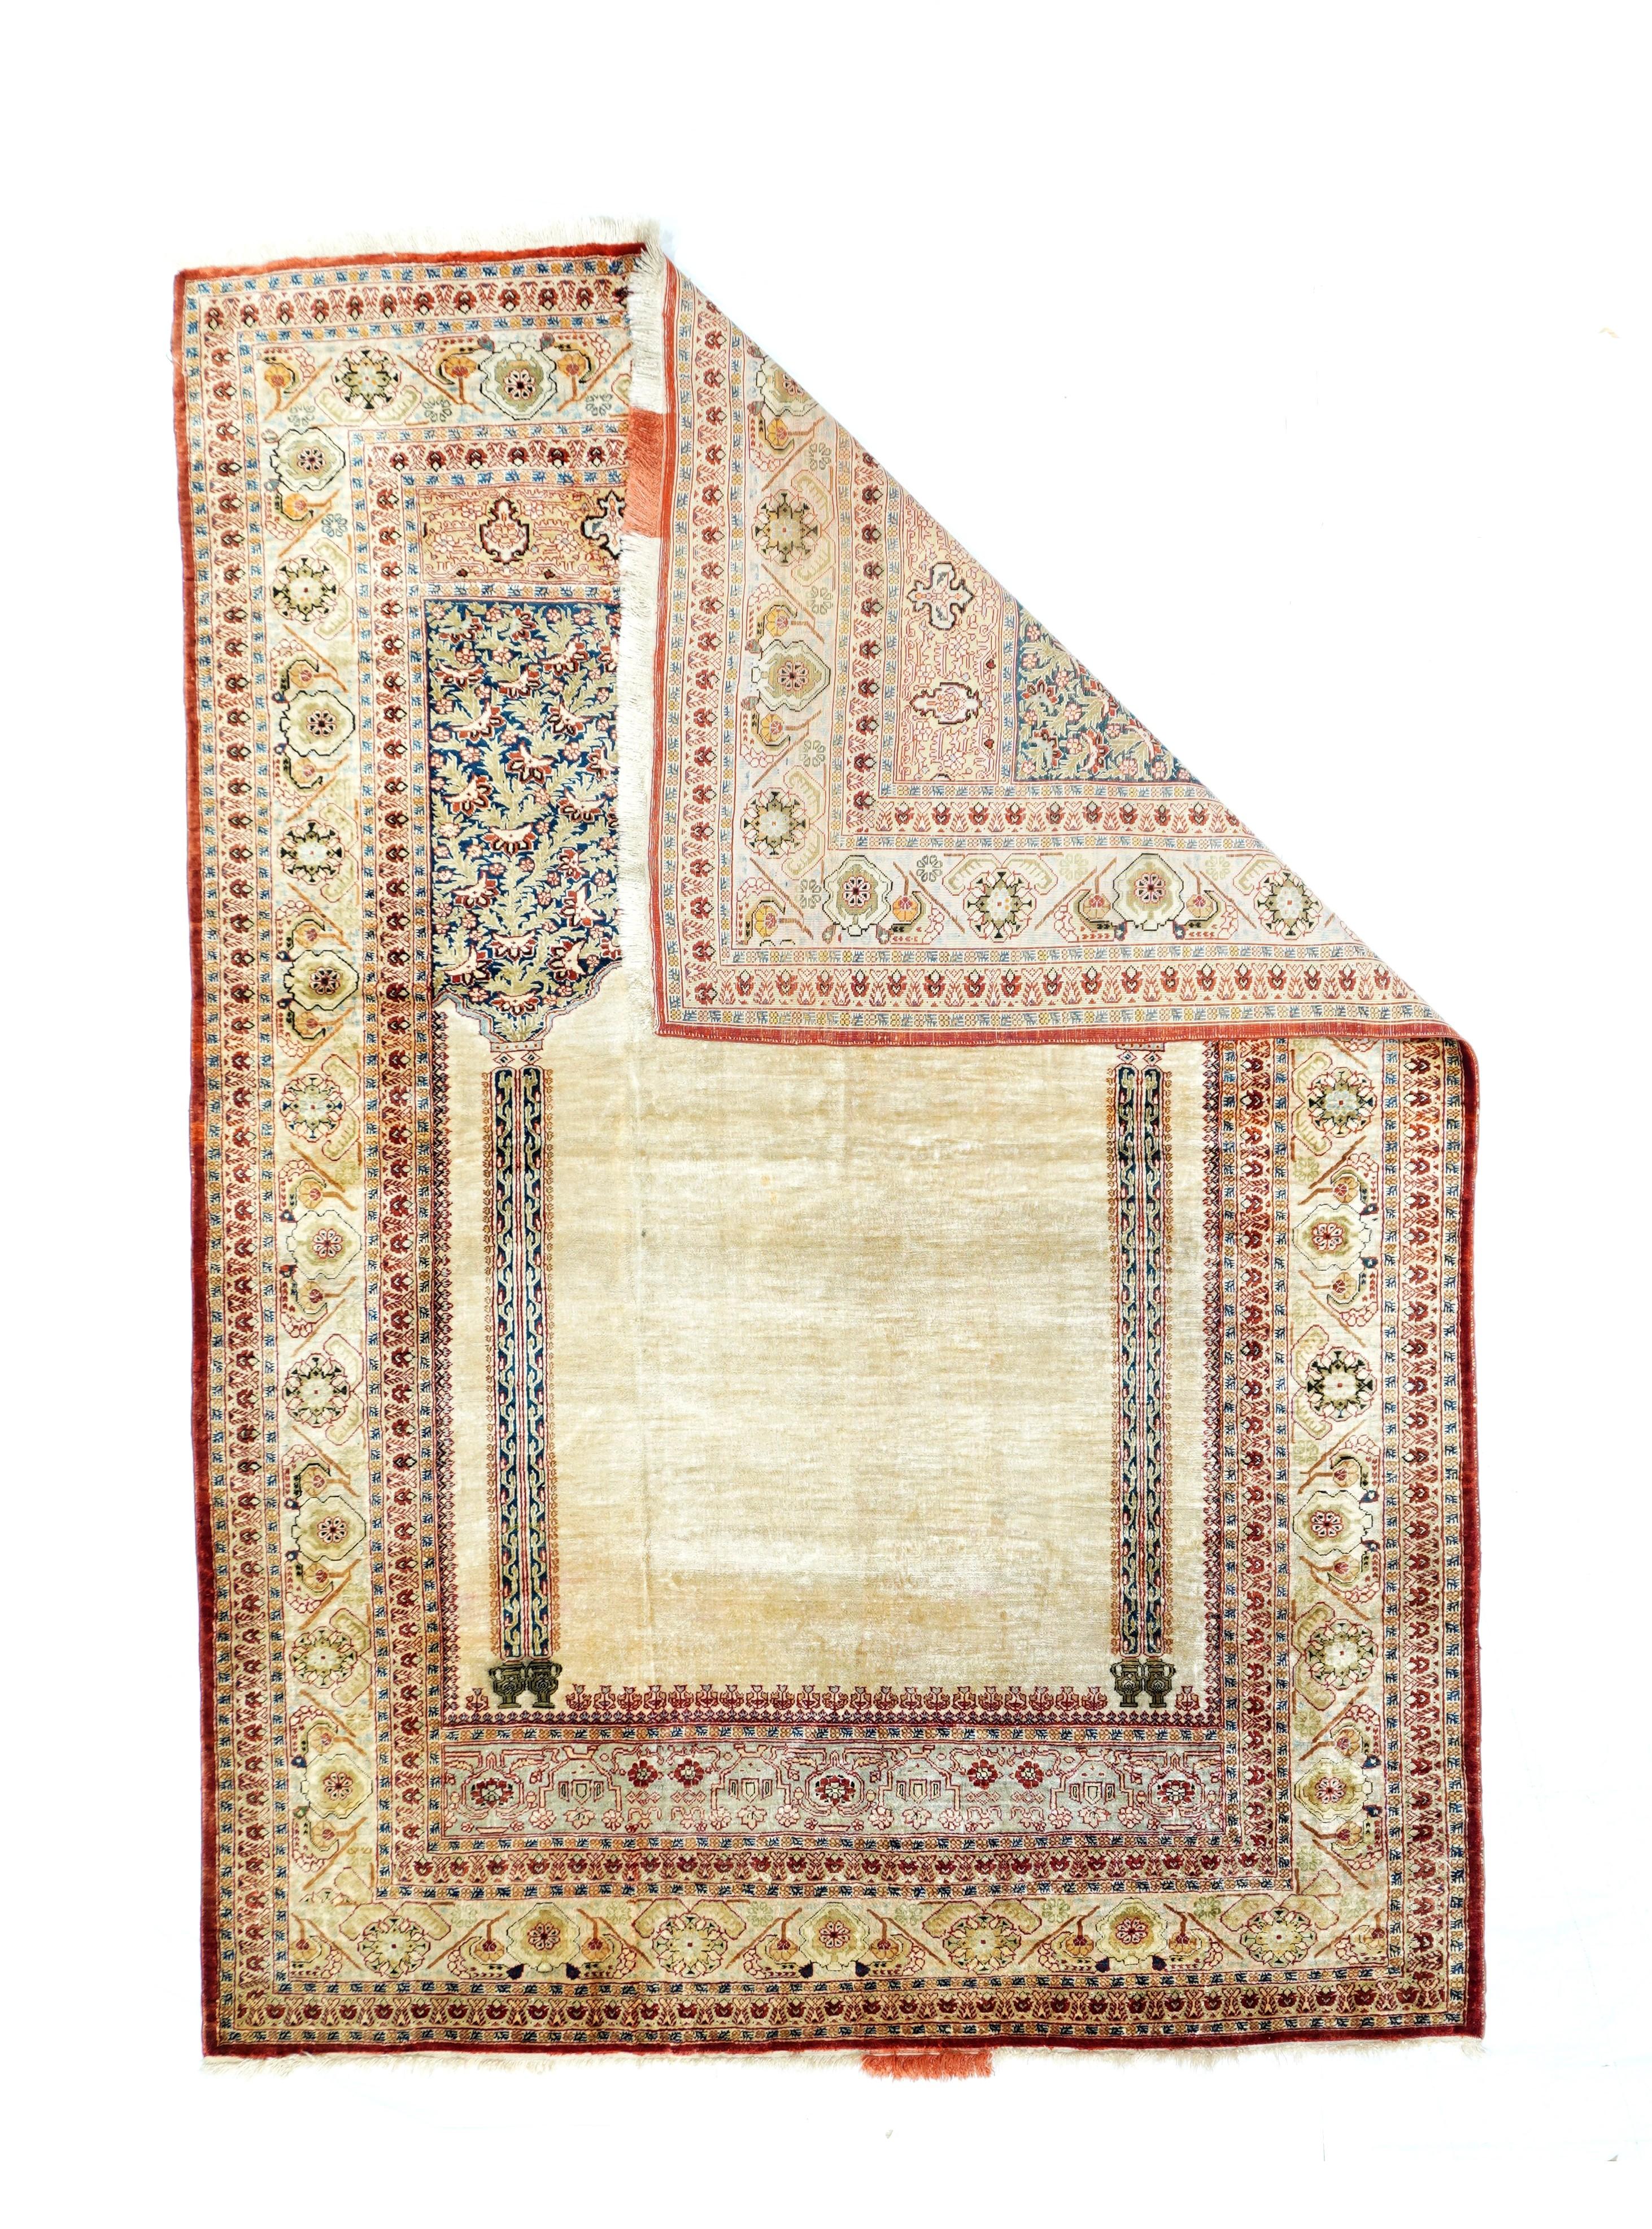 Tabriz is believed to have incorporated curved lines that were commonly used in ottoman rugs to Persian weaving while working as the first seat of the royal weaving workshops of Safavid rugs. Hadji Jalili is known as the most famous weaver who